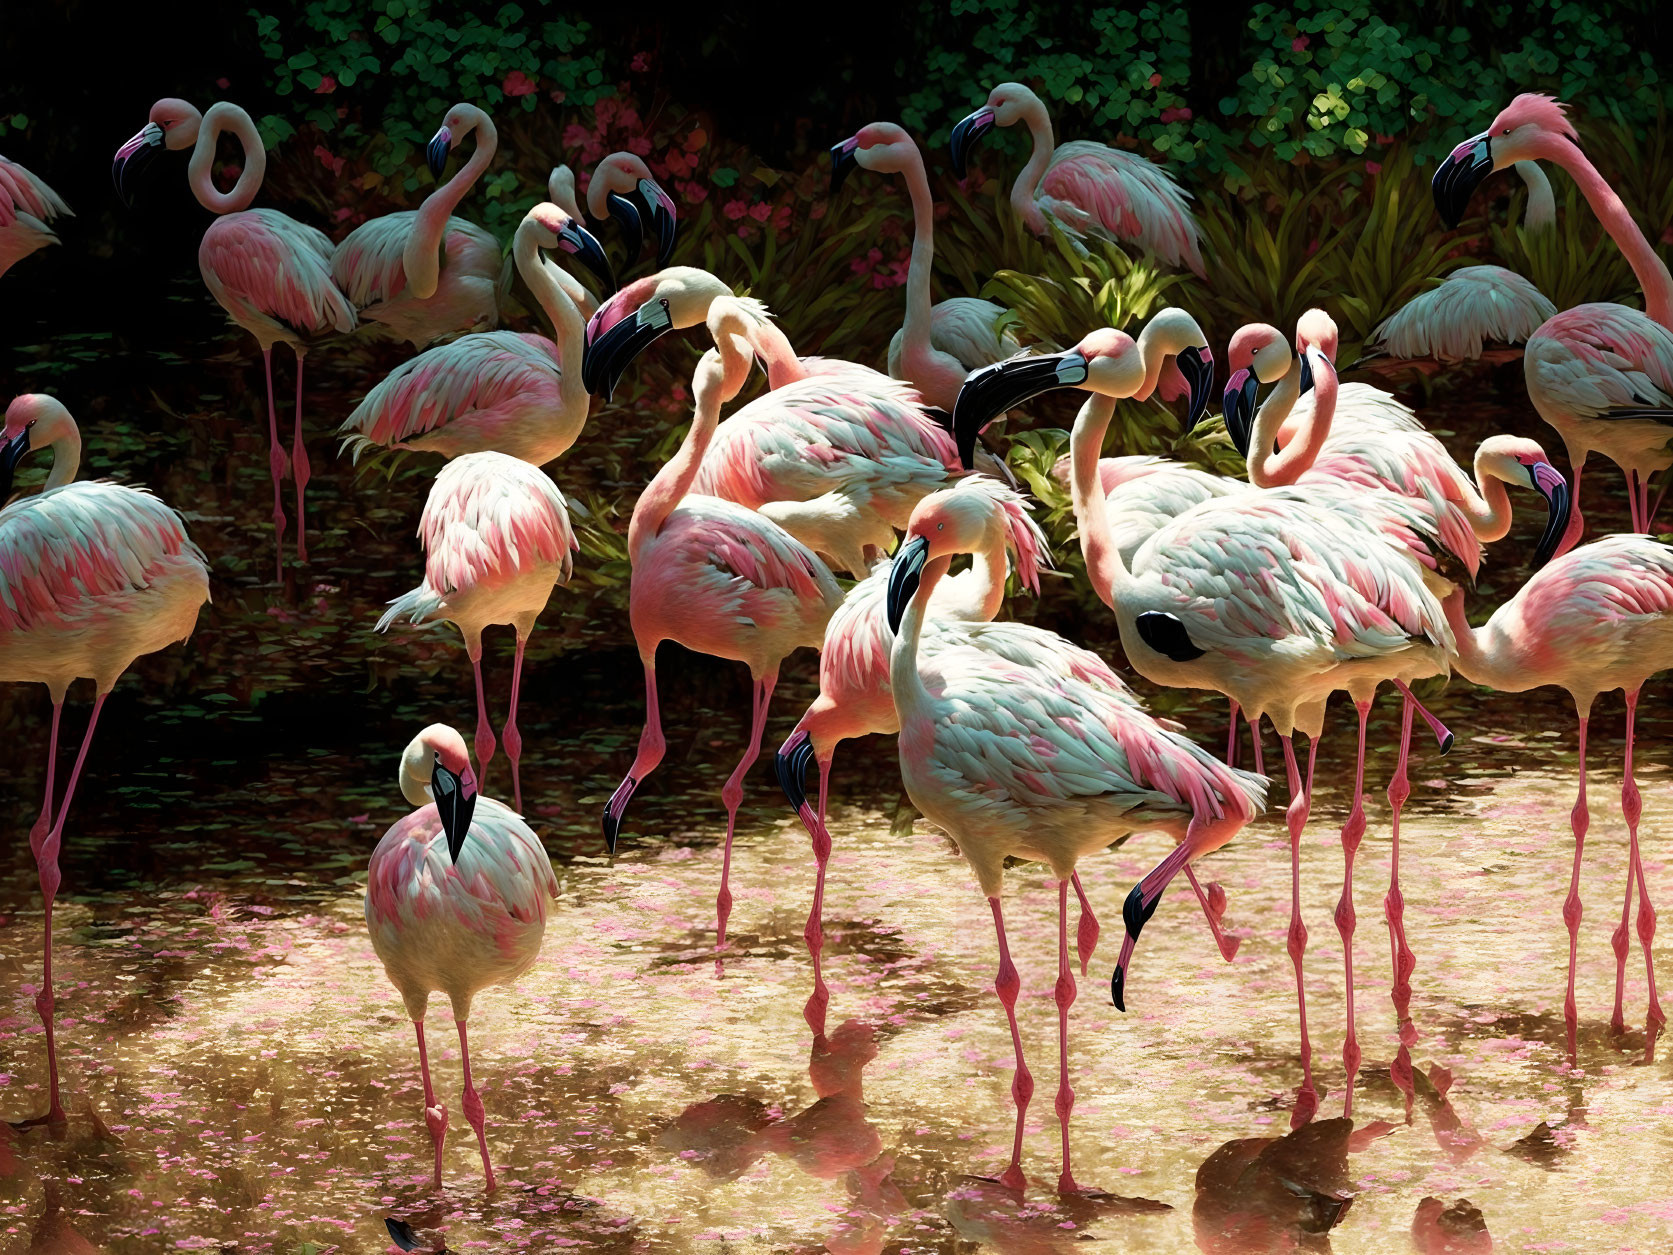 Pink and white flamingos in shallow water with dark foliage, creating a vibrant contrast.